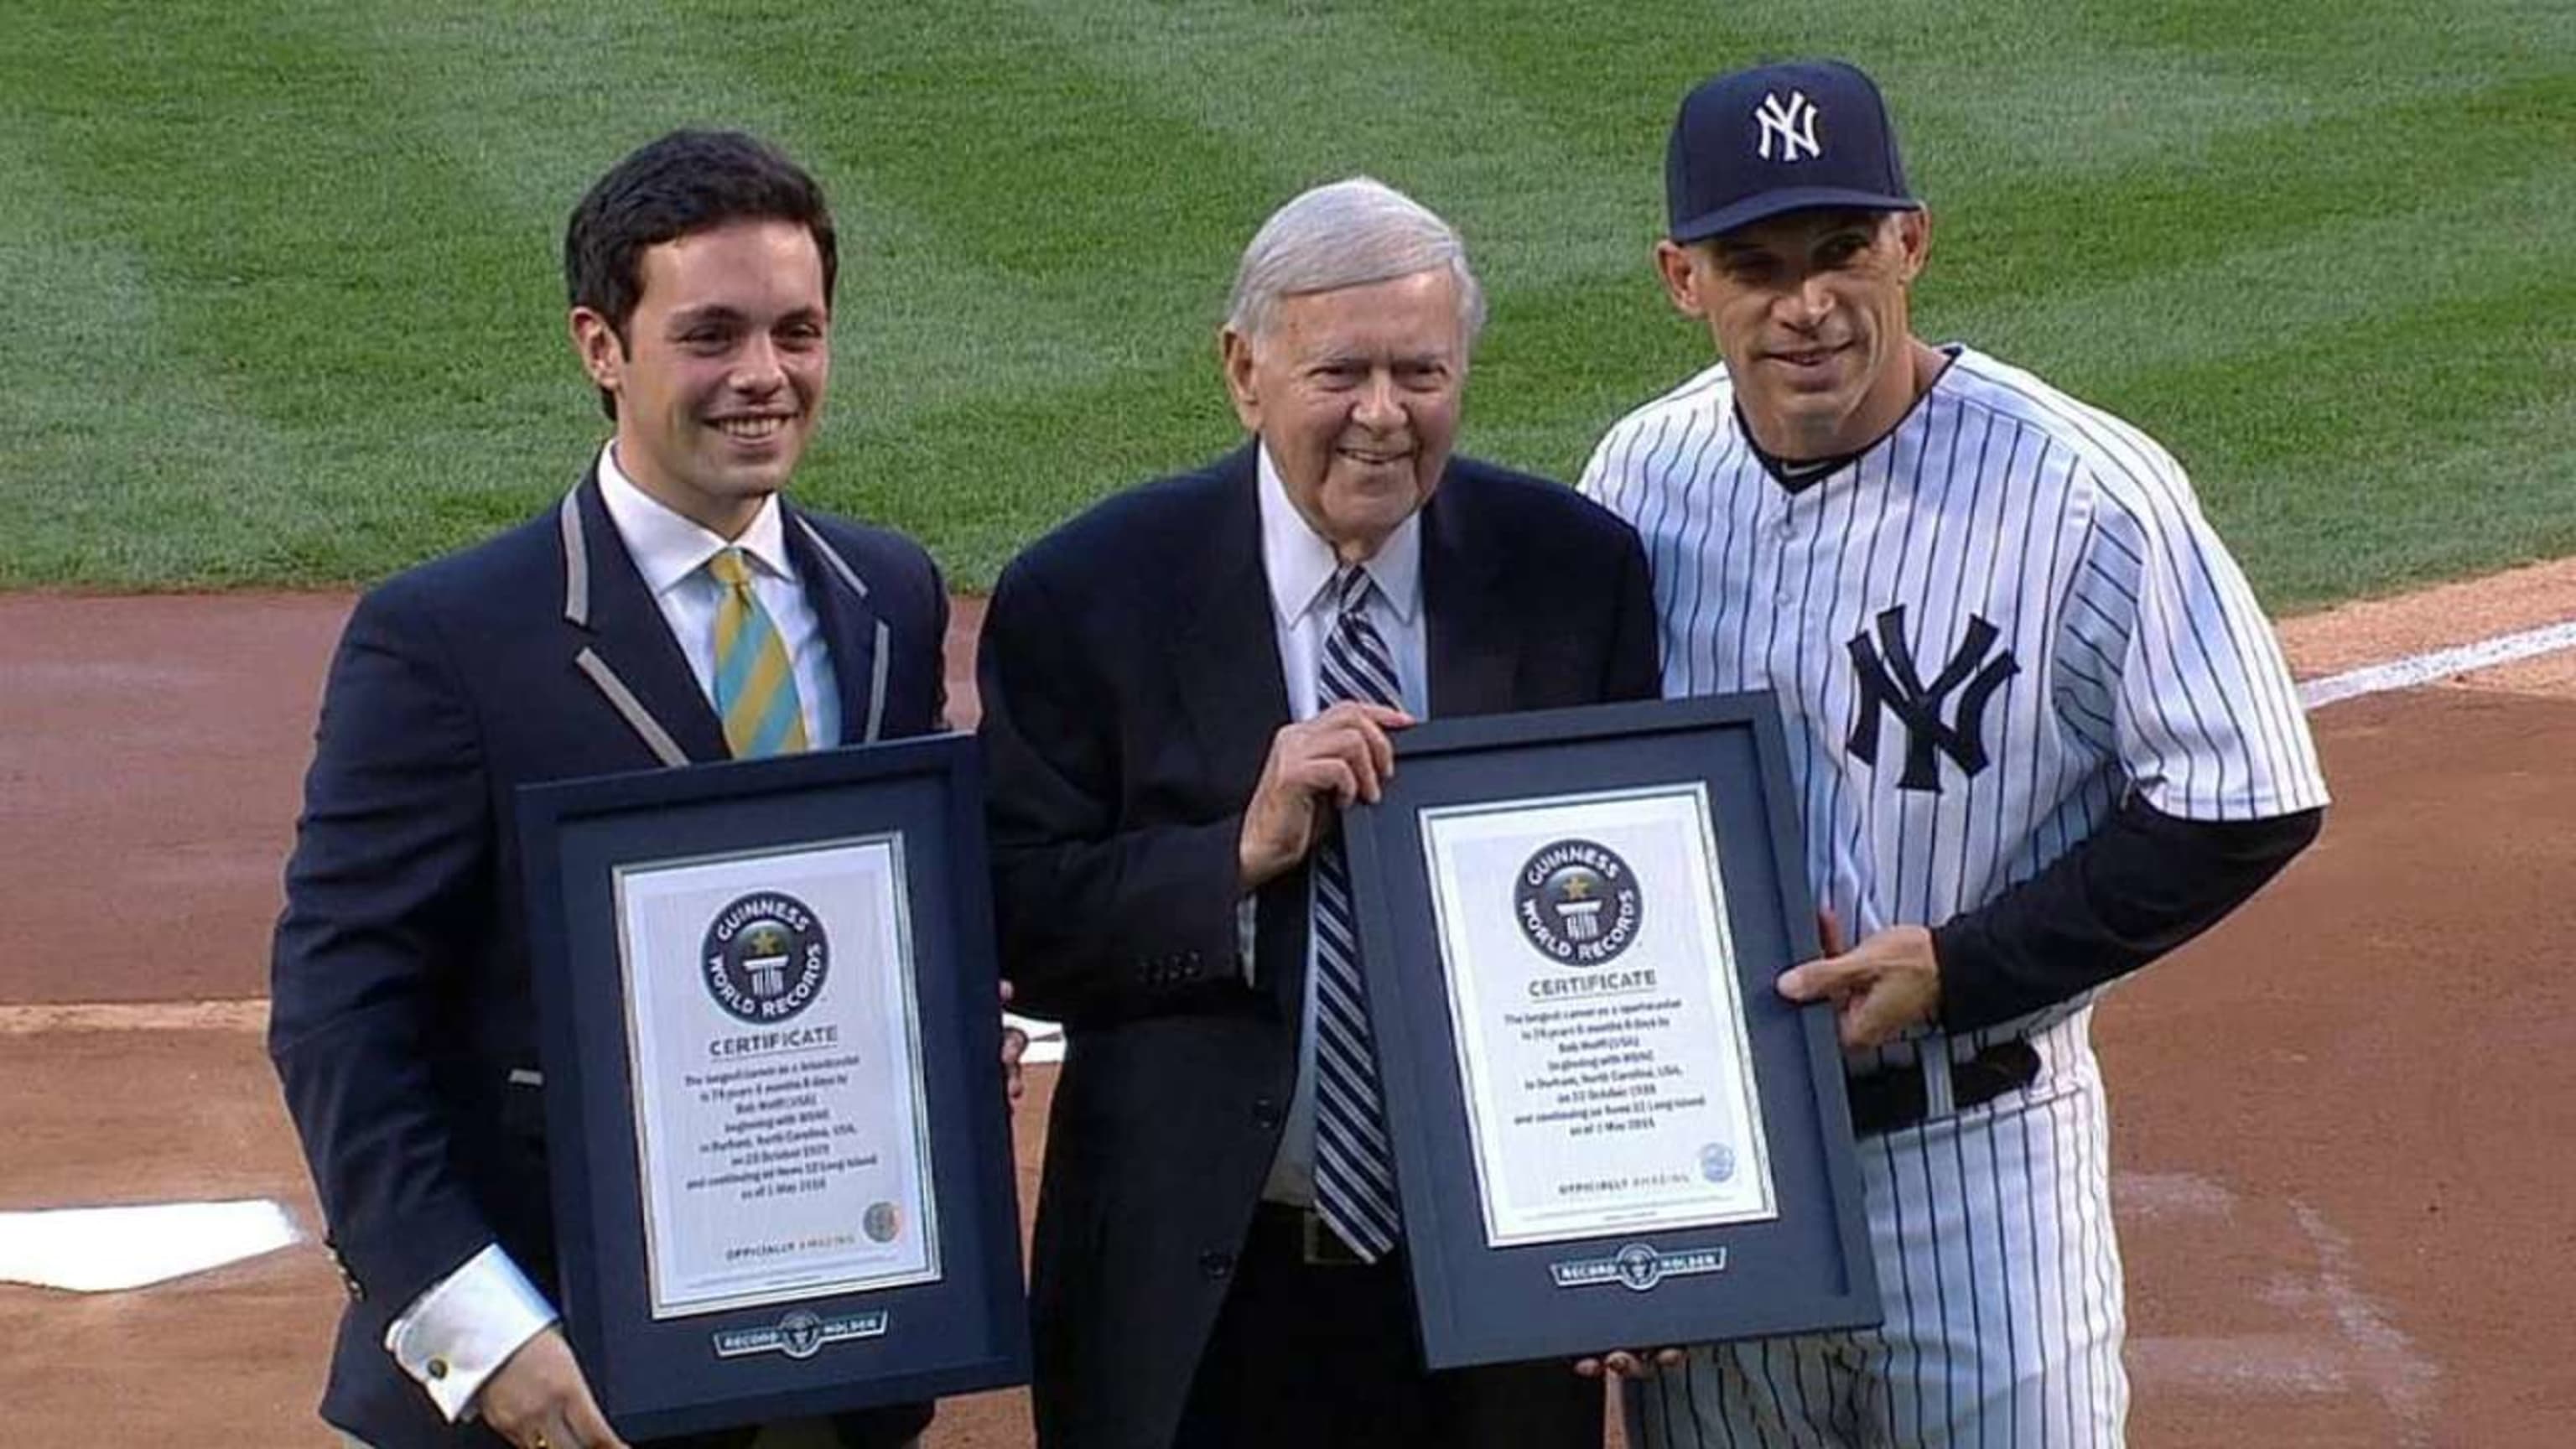 Don Larsen, Yankees Legend Who Pitched Perfect Game in World